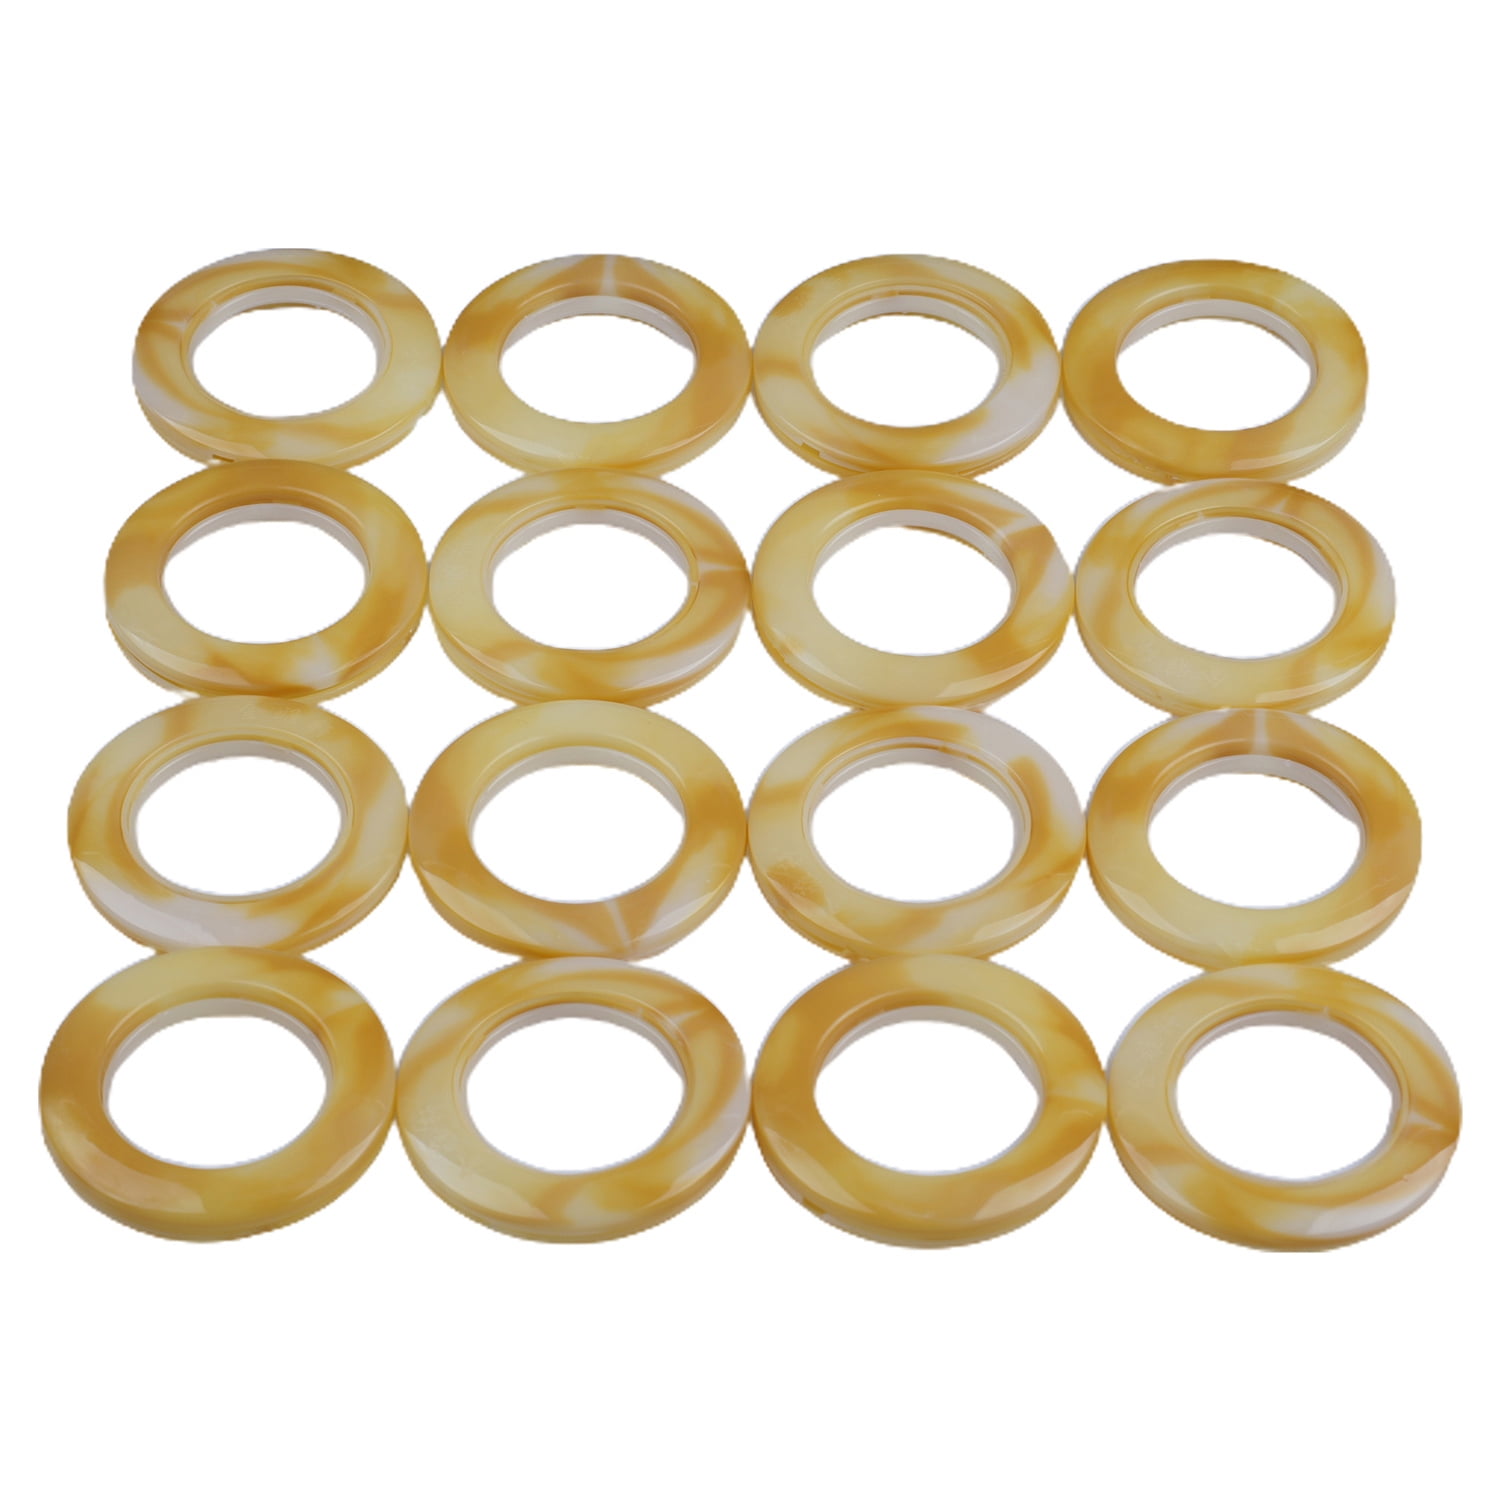 40x Plastic Eyelet Curtain Rings Round Snap Clips Grommet Window Decor 33mm 